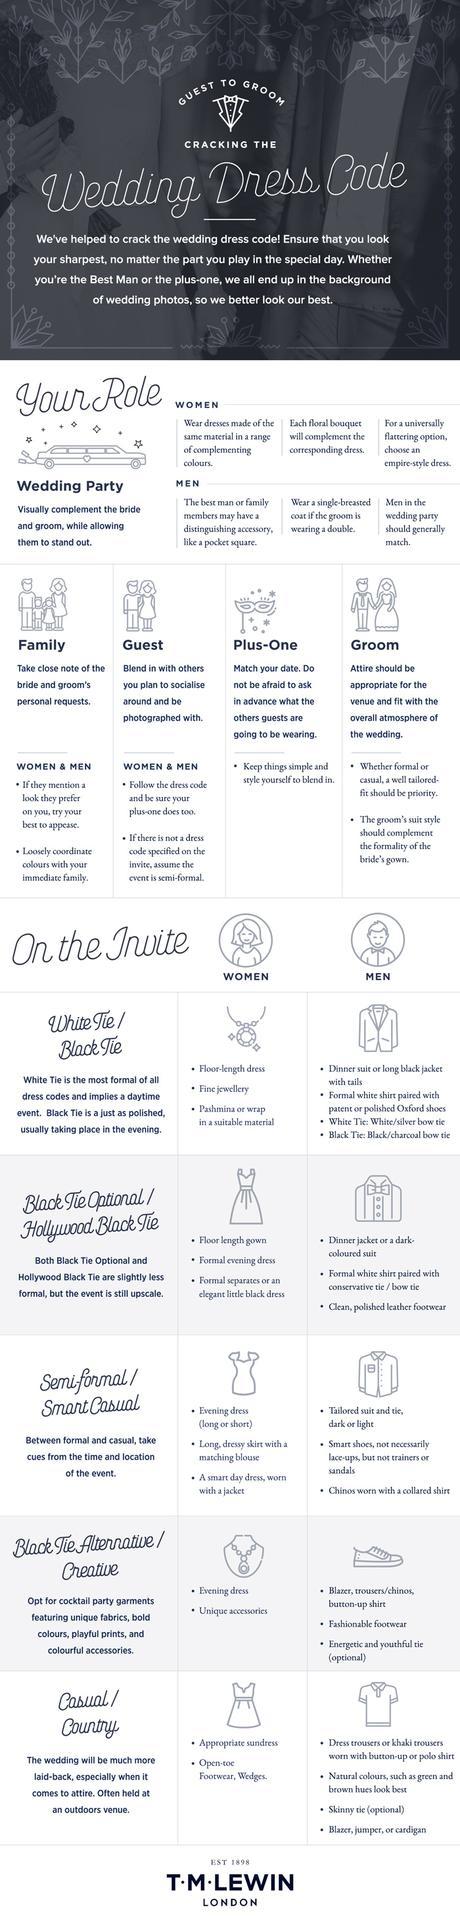 Wedding Guest Guidelines: Navigating What to Wear & When [Infographic]